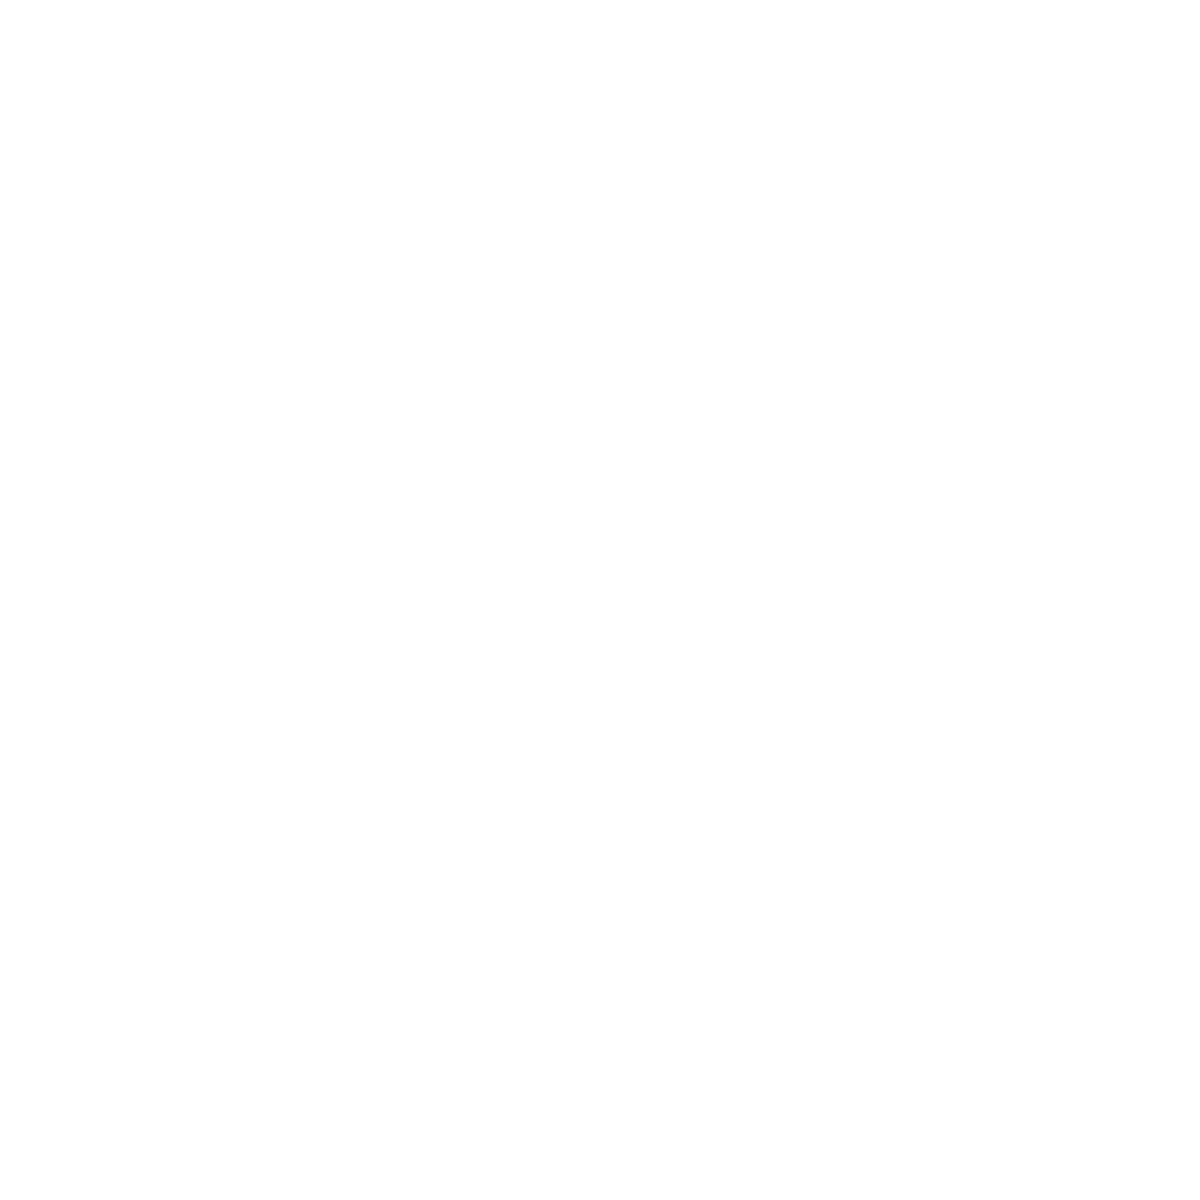 Computer with line graph icon